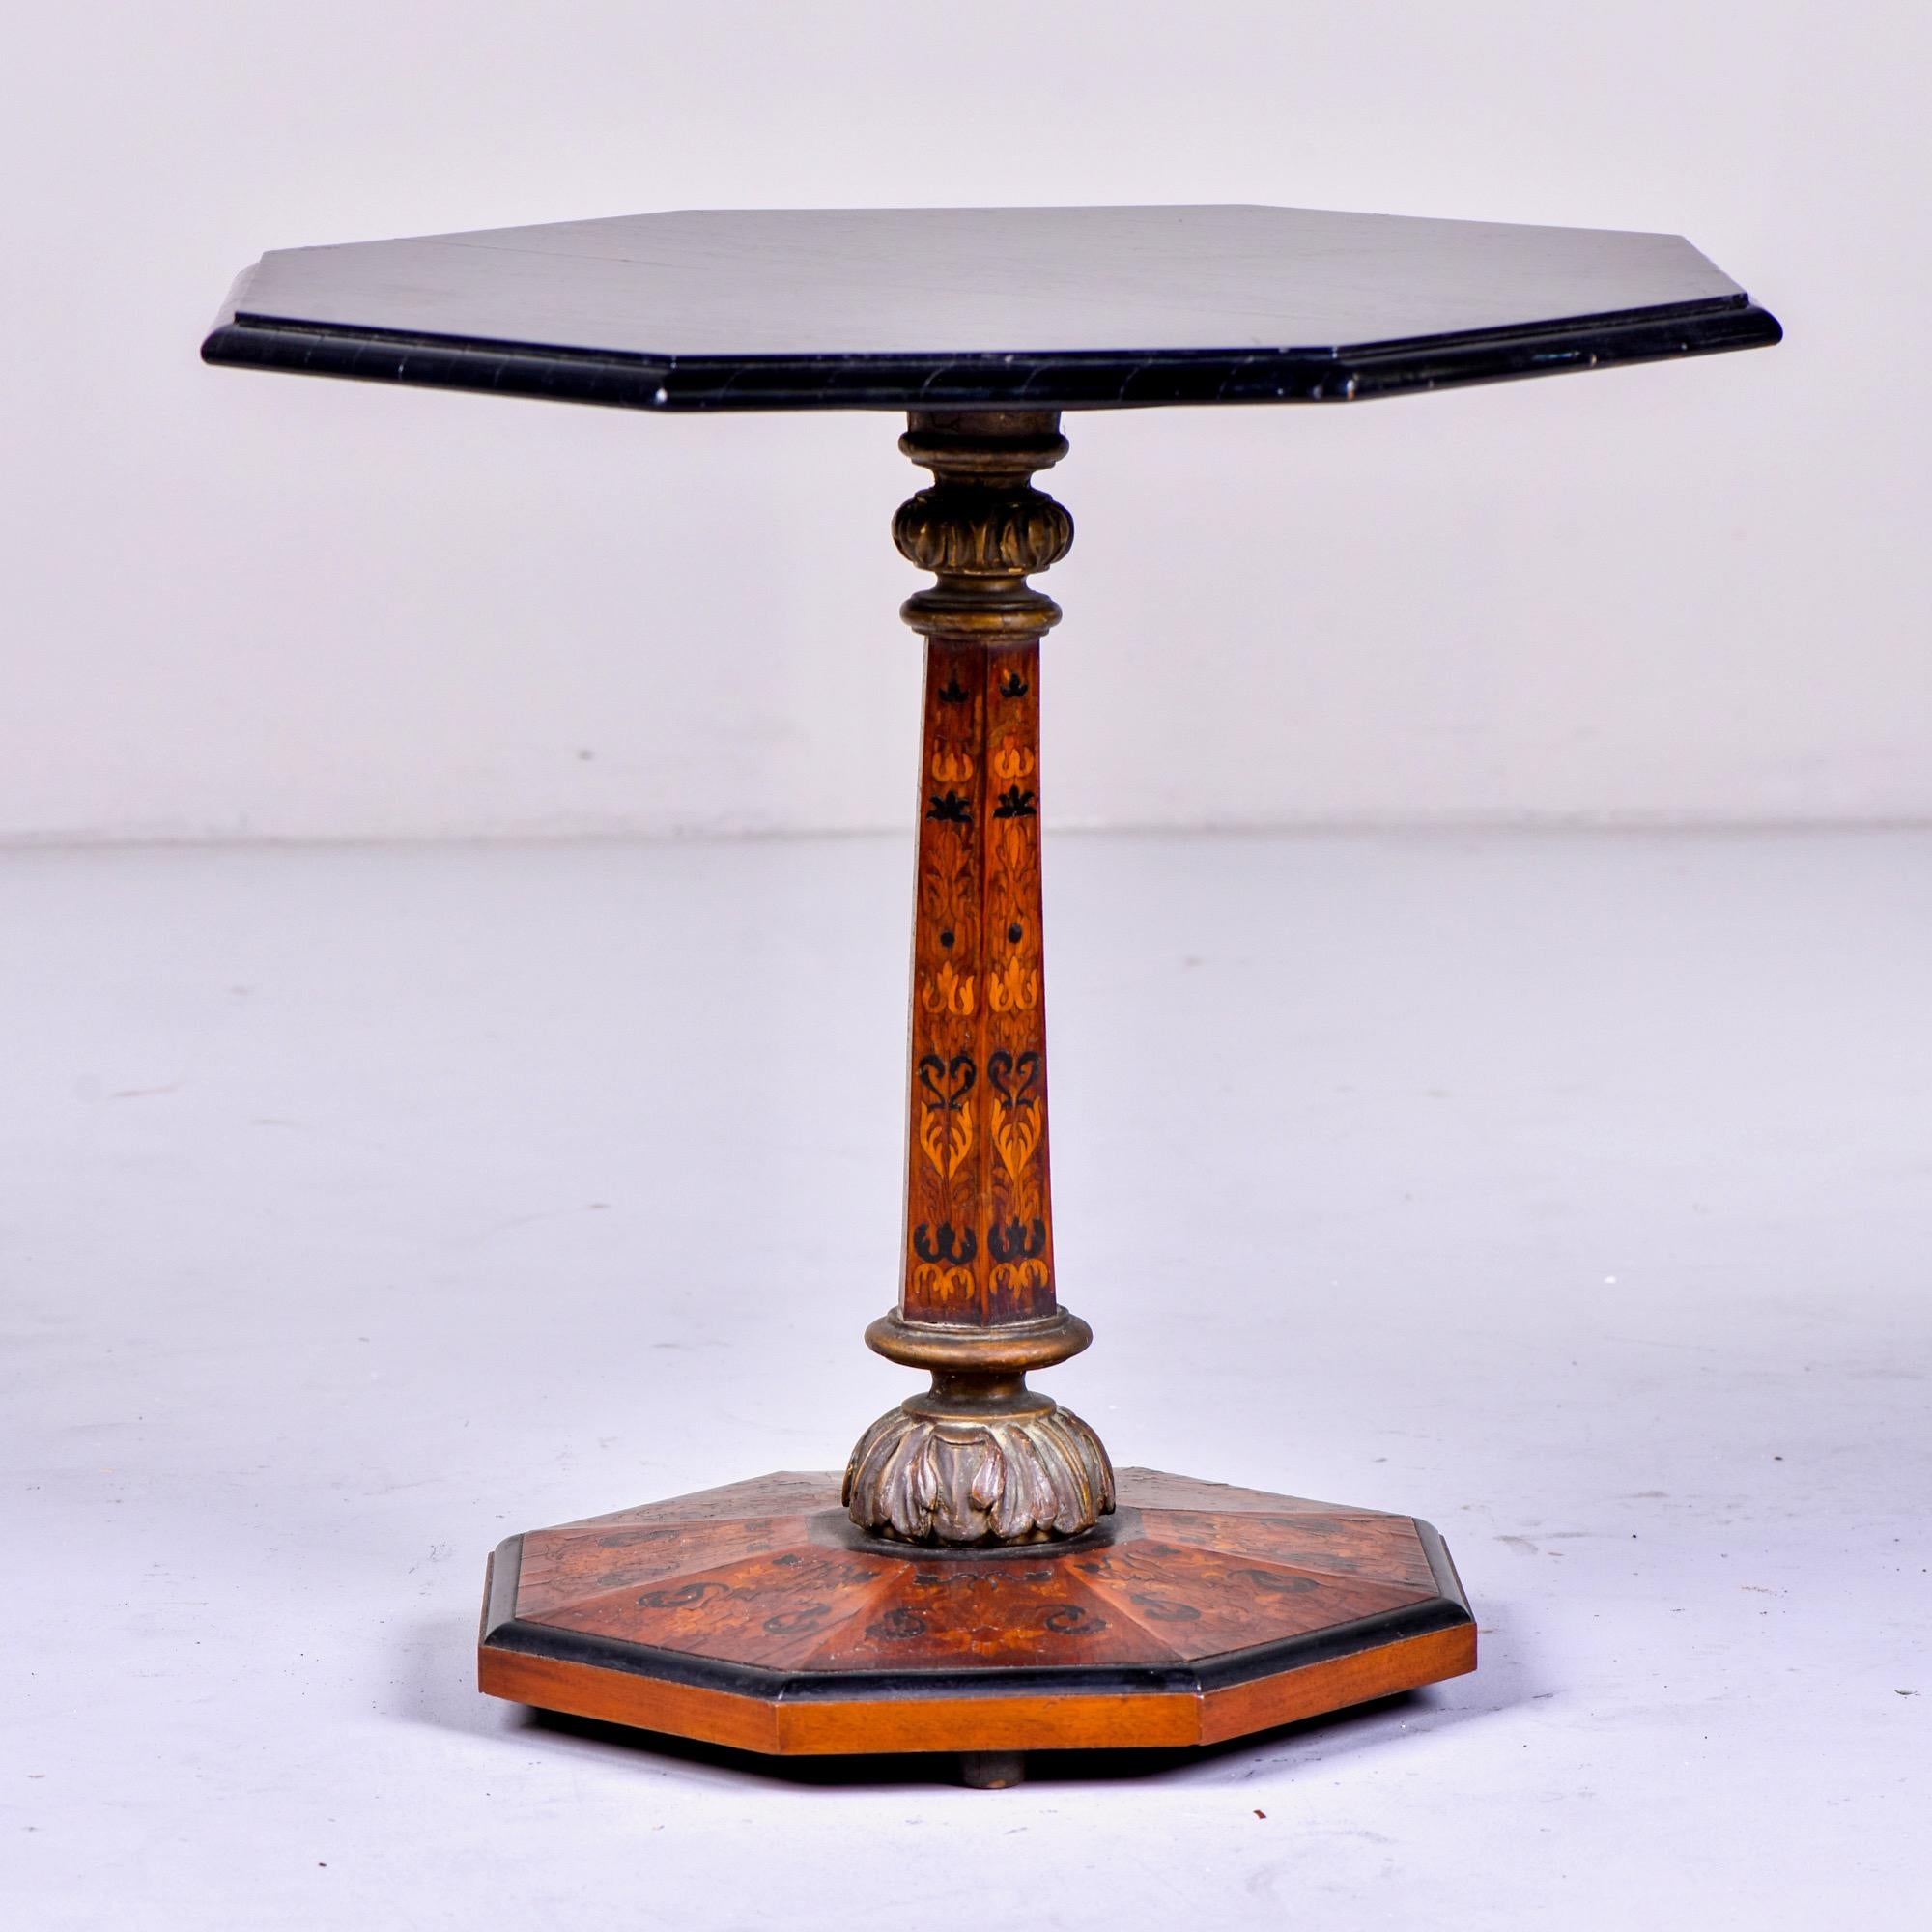 English side table features an octagonal base and center support with marquetry and an eight-sided black lacquered top, circa 1880s. Unknown maker.